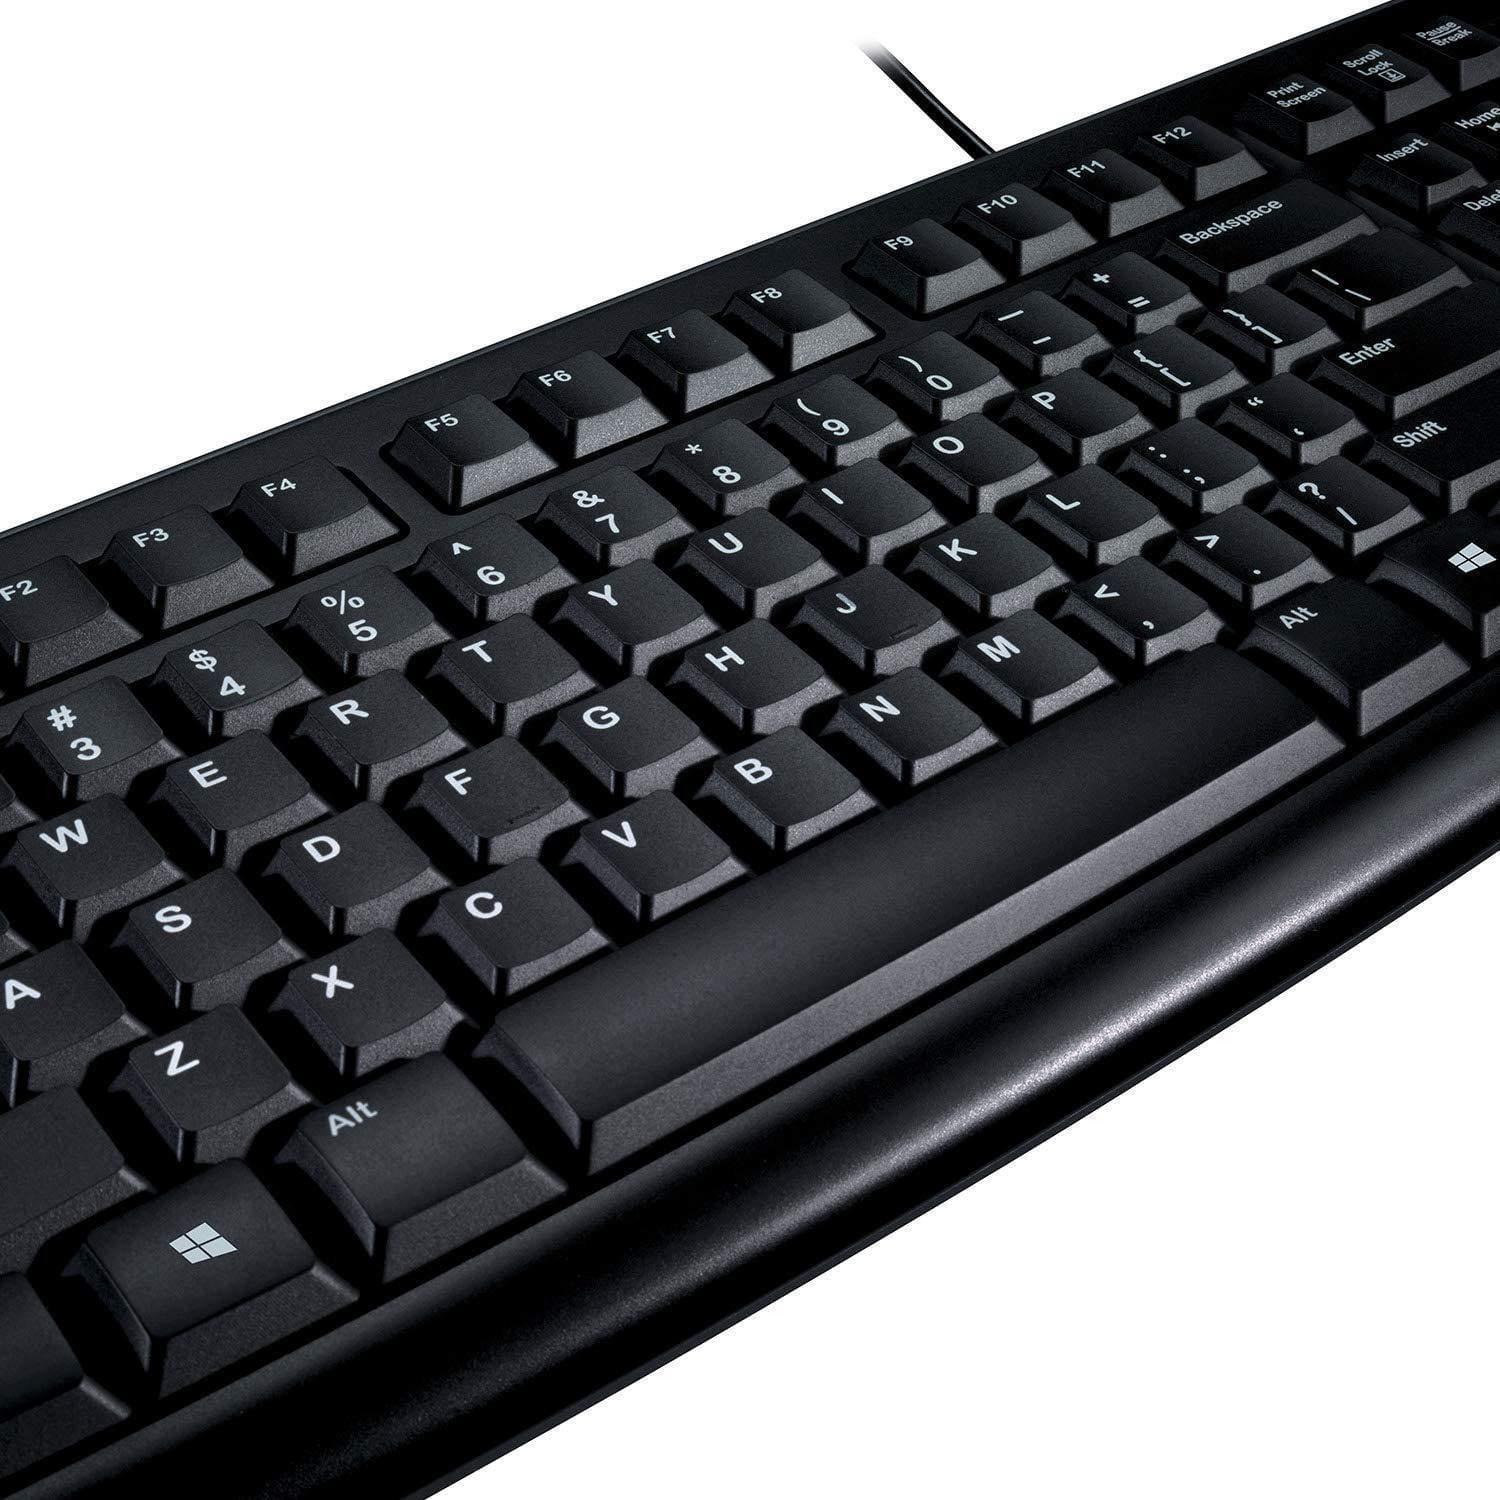 Logitech Usb Keyboard K120 Wired Plug-and-Play.-Computers and Laptops-dealsplant